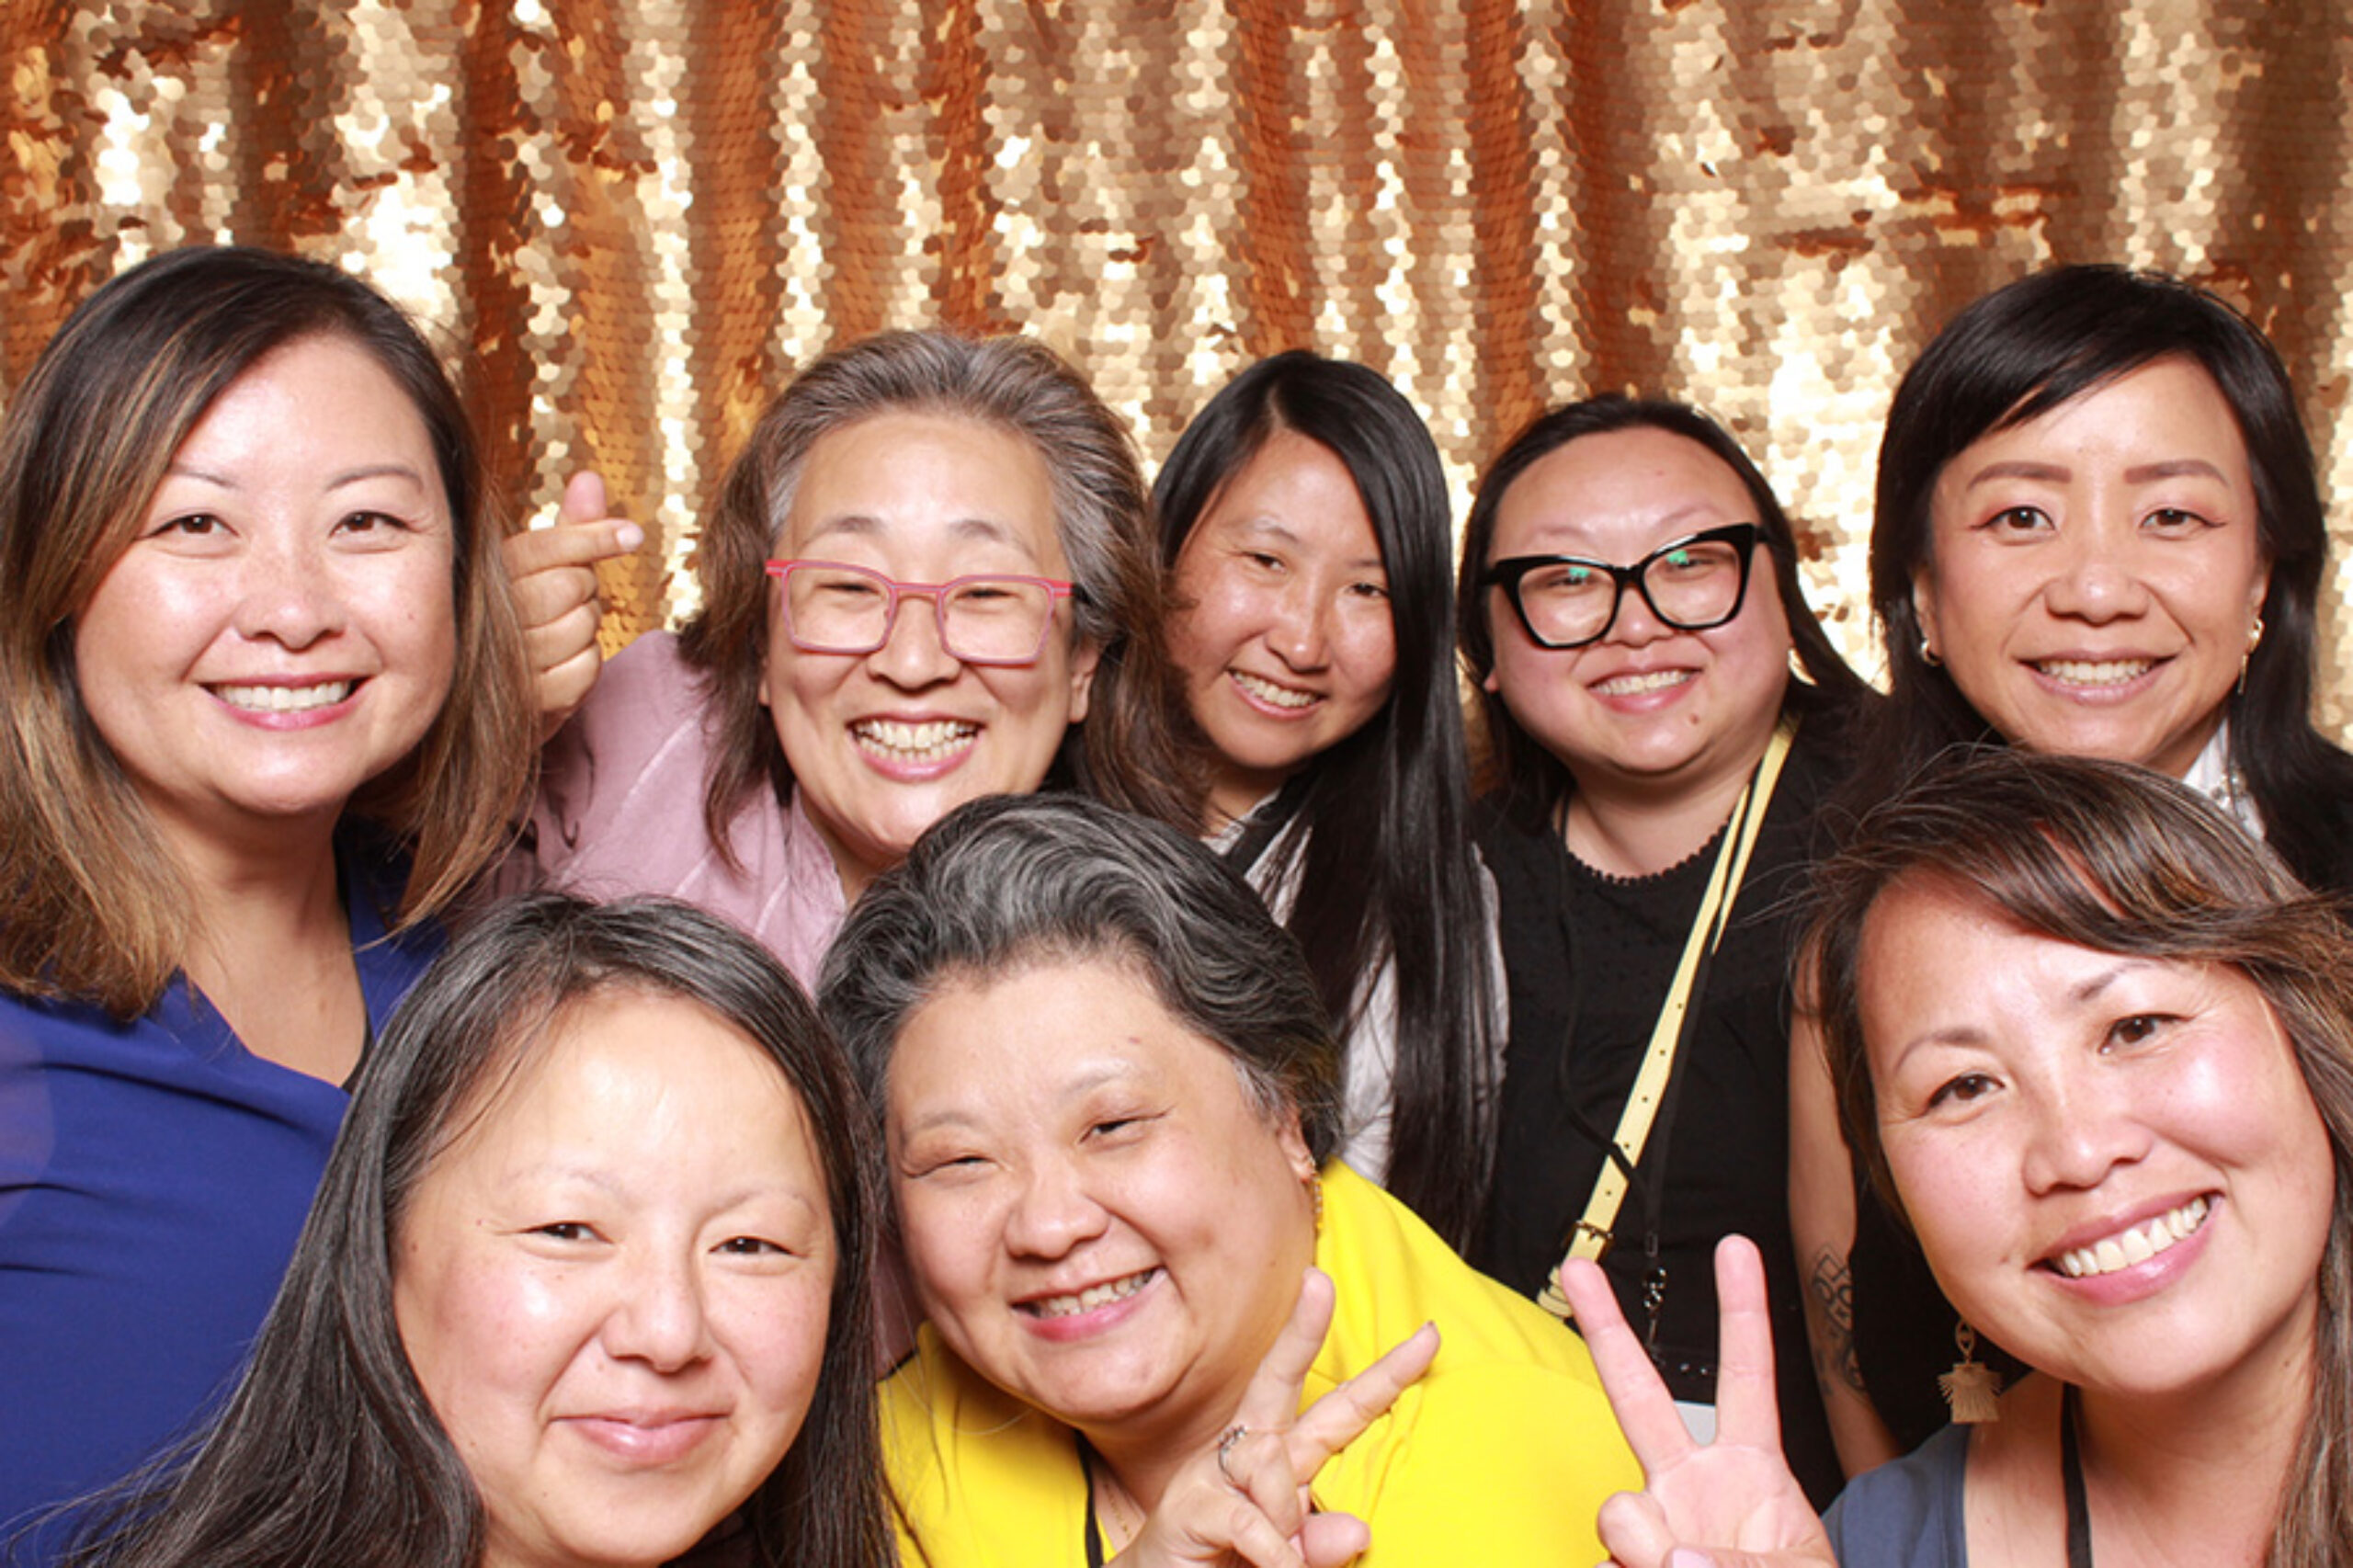 Group of people at 75th anniversary event photo booth